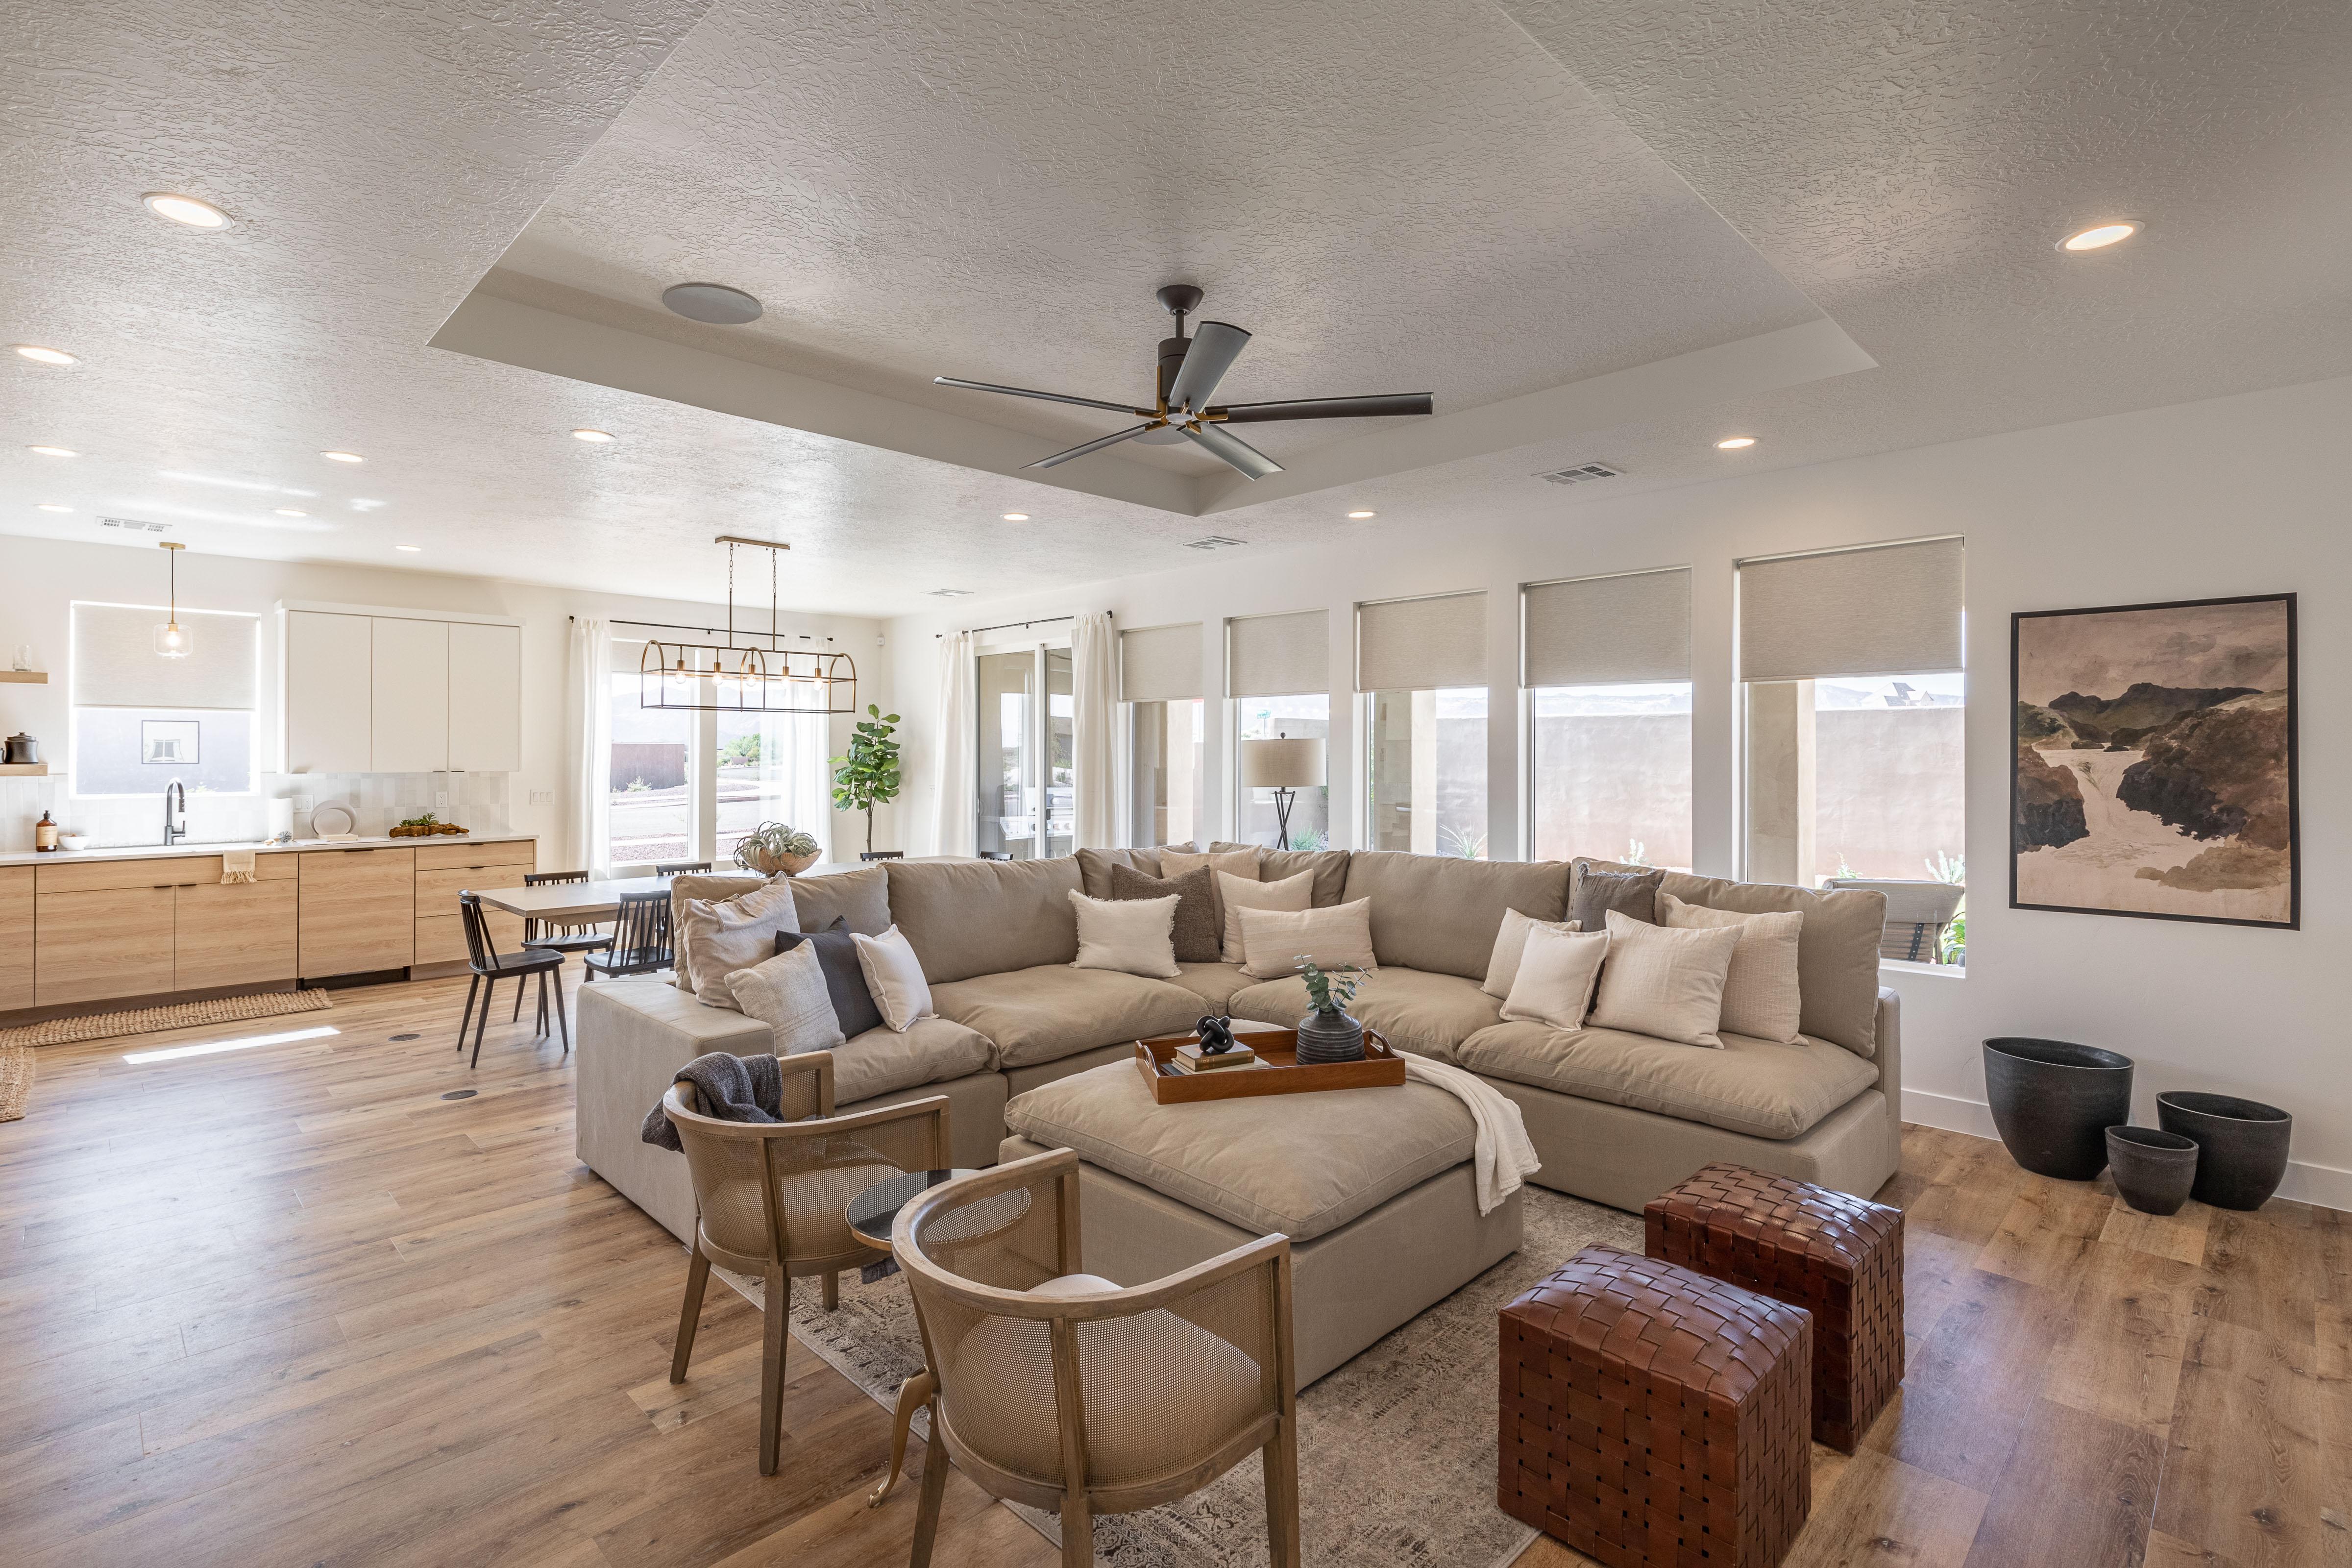 The Living Room is conveniently located adjacent to the Kitchen and Dining Table and is a great place for entertaining guests during downtime.